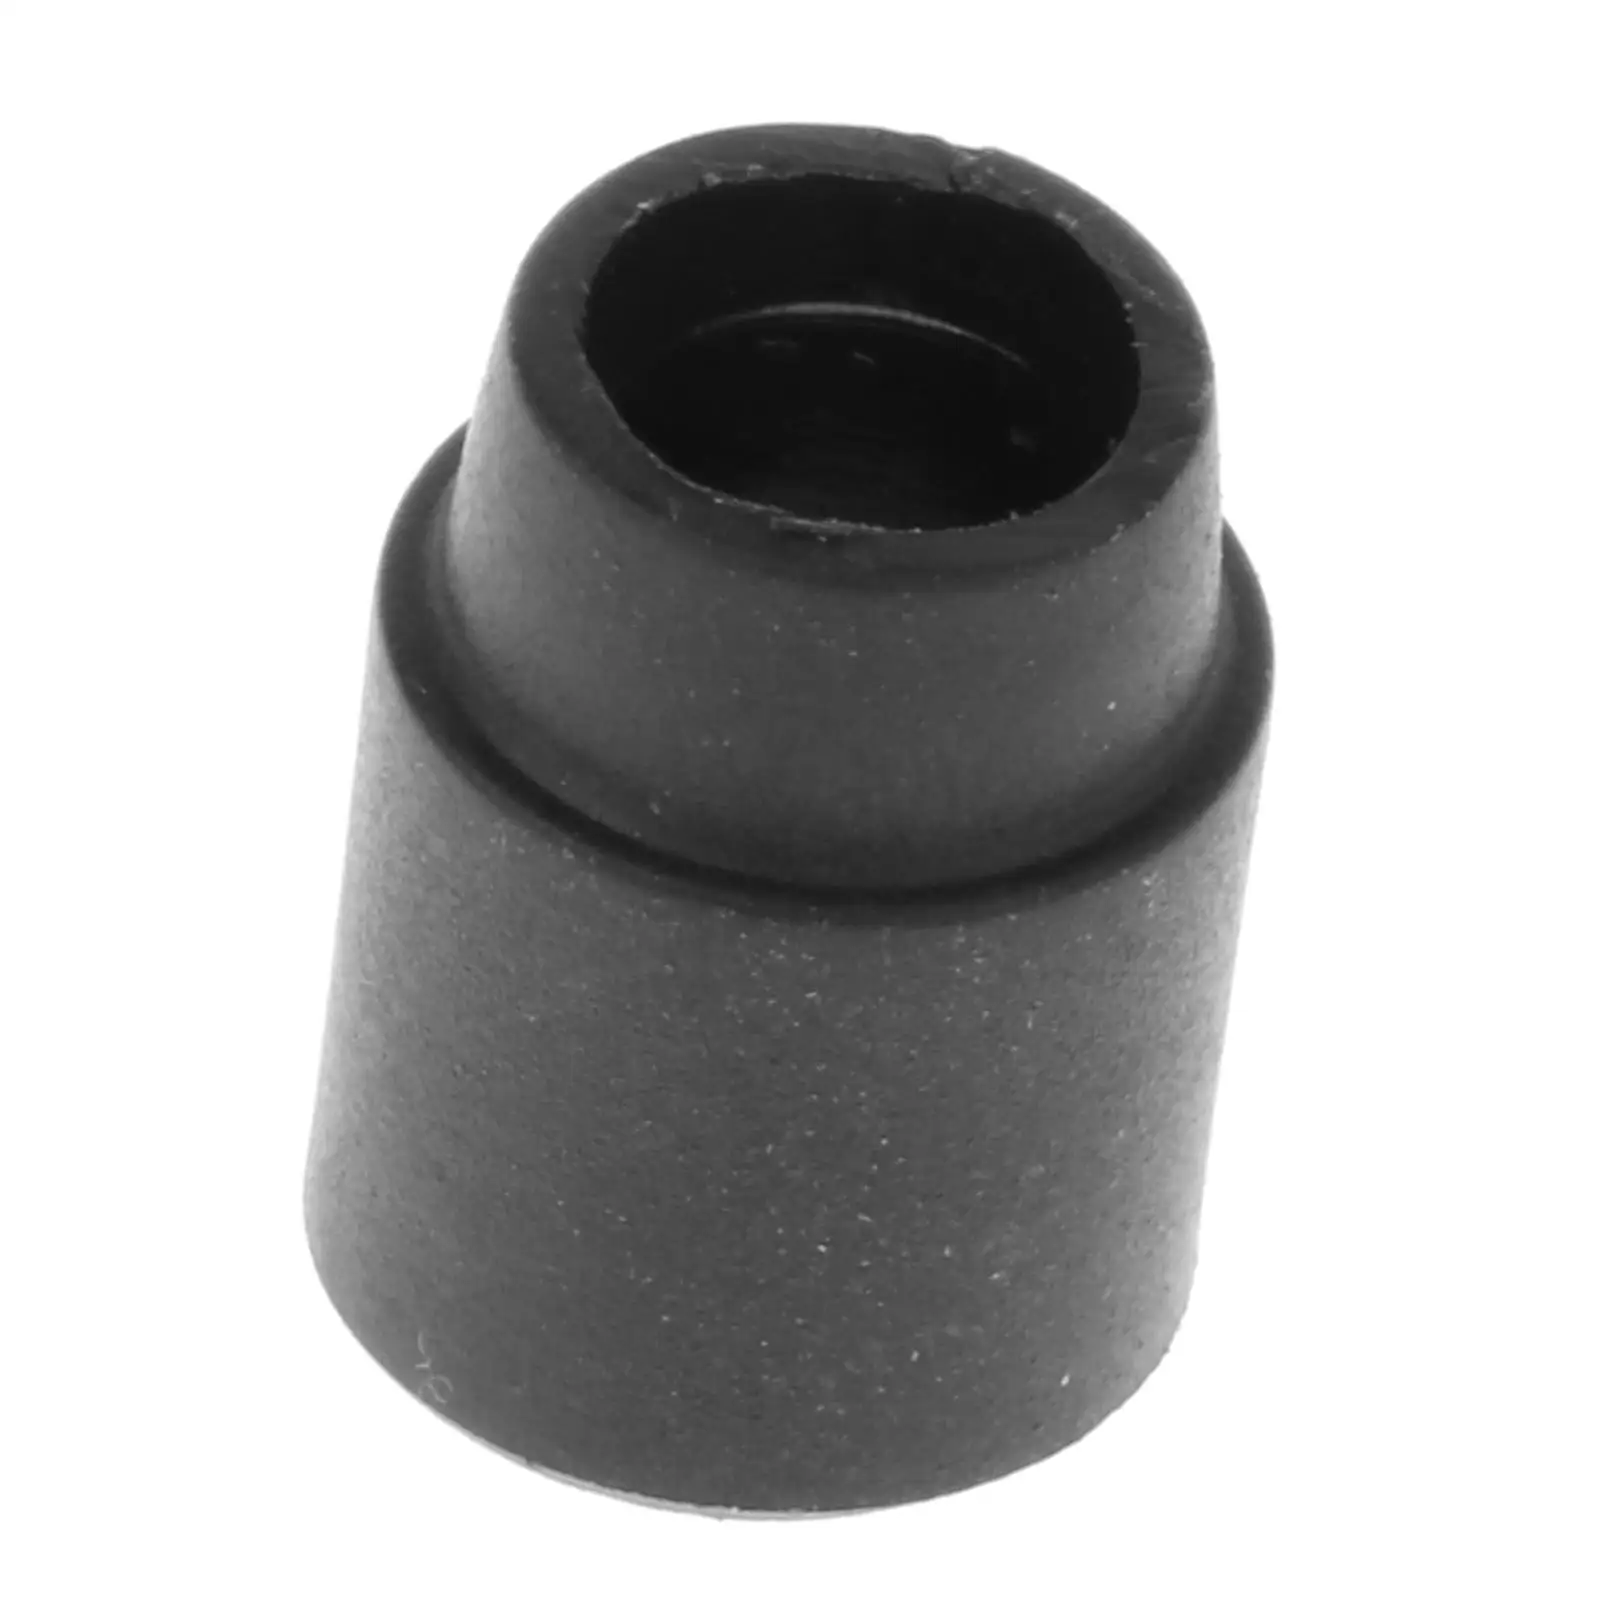 682-41291-00 cam Roller Direct Replaces 682-41291 Durable Professional Accessory